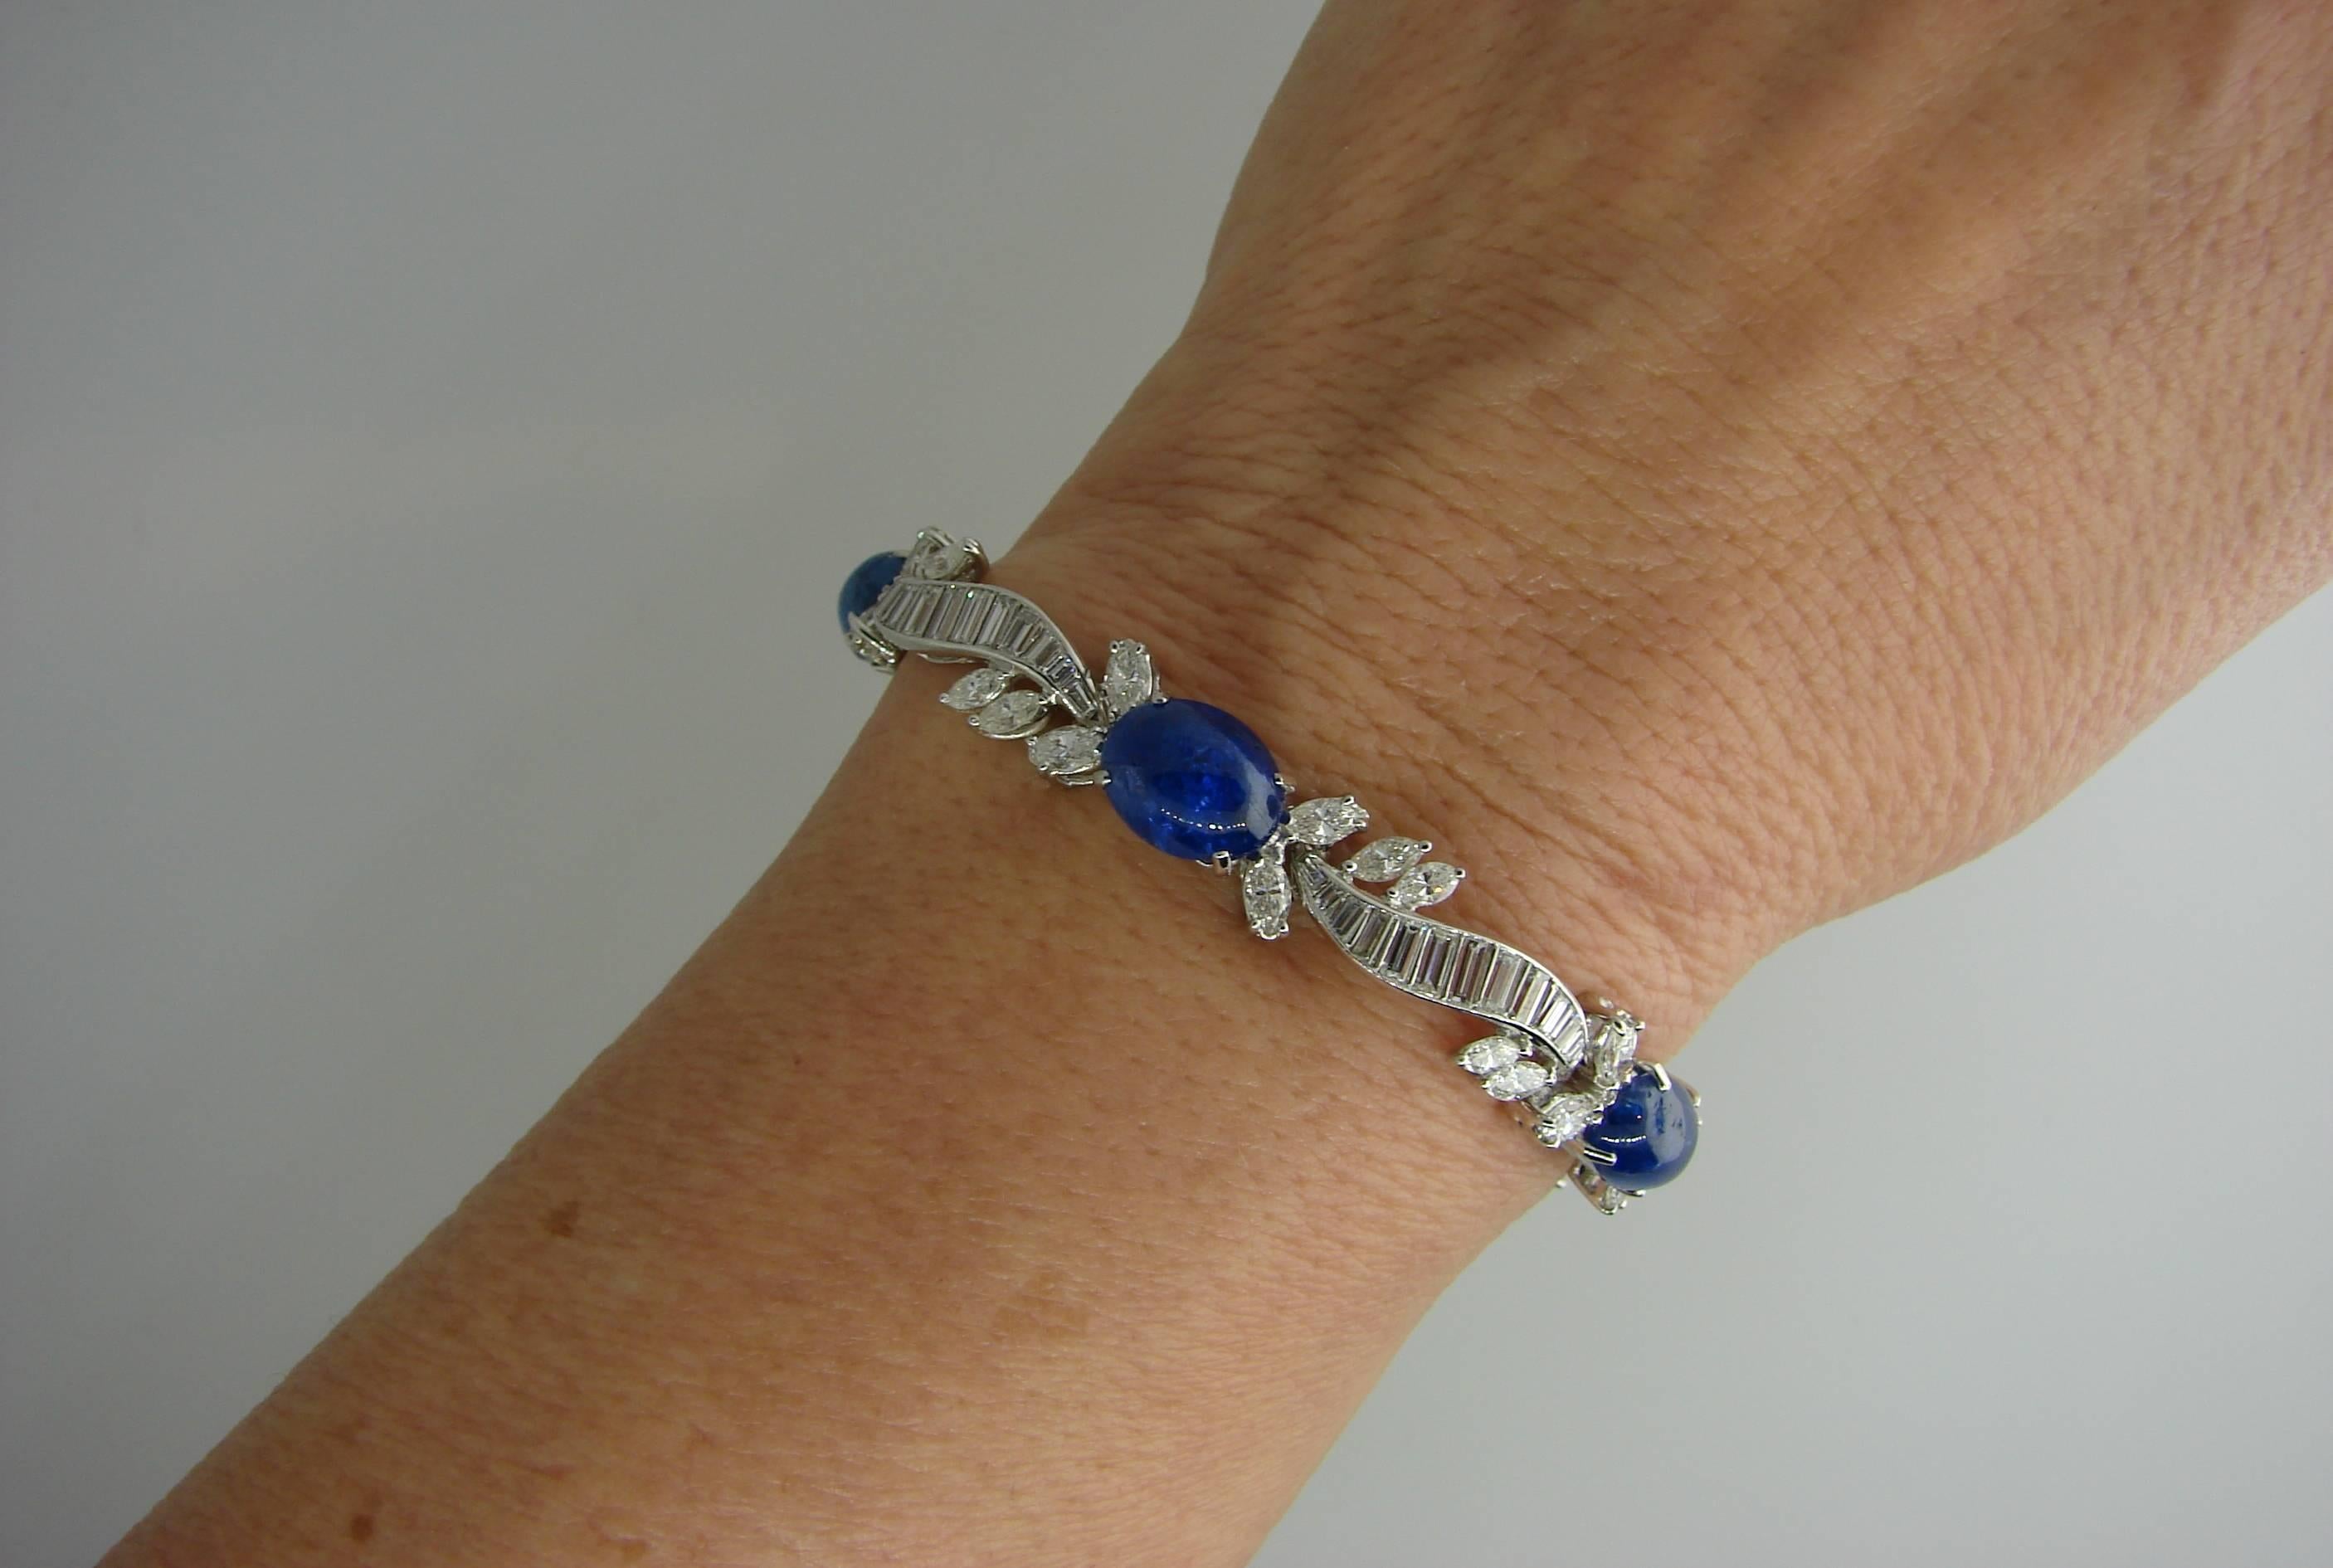 Magnificent classy and elegant bracelet created by Van Cleef & Arpels in the 1960's. Features five cabochon sapphires and multiple baguette cut and marquise cut diamonds set in platinum.
Fits up to 6.5" - 7" wrist.
The sapphires are